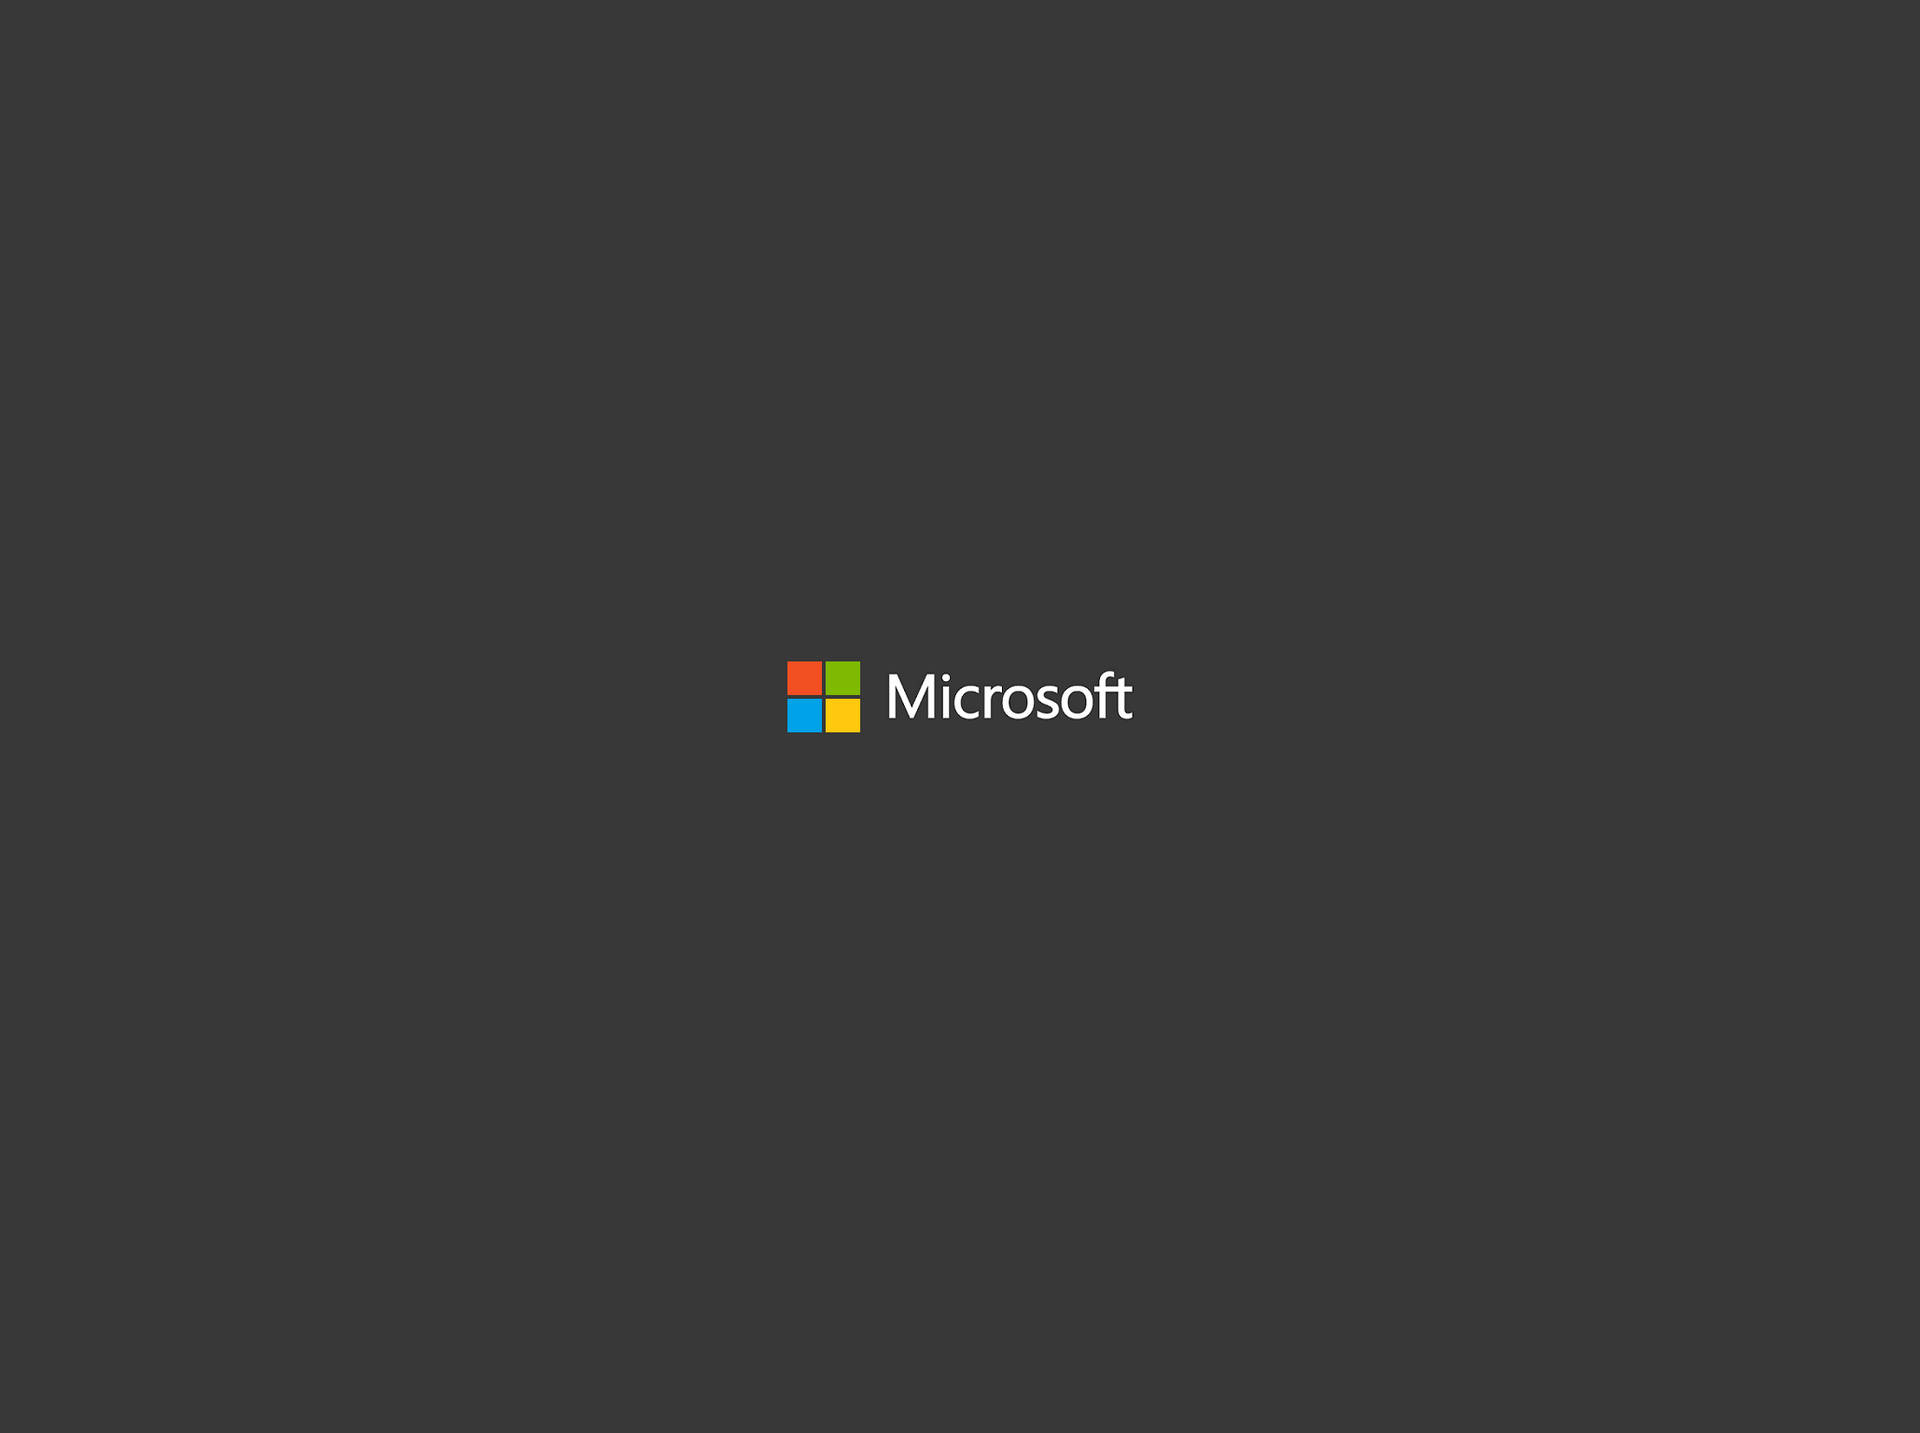 Microsoft 2058X1536 Wallpaper and Background Image